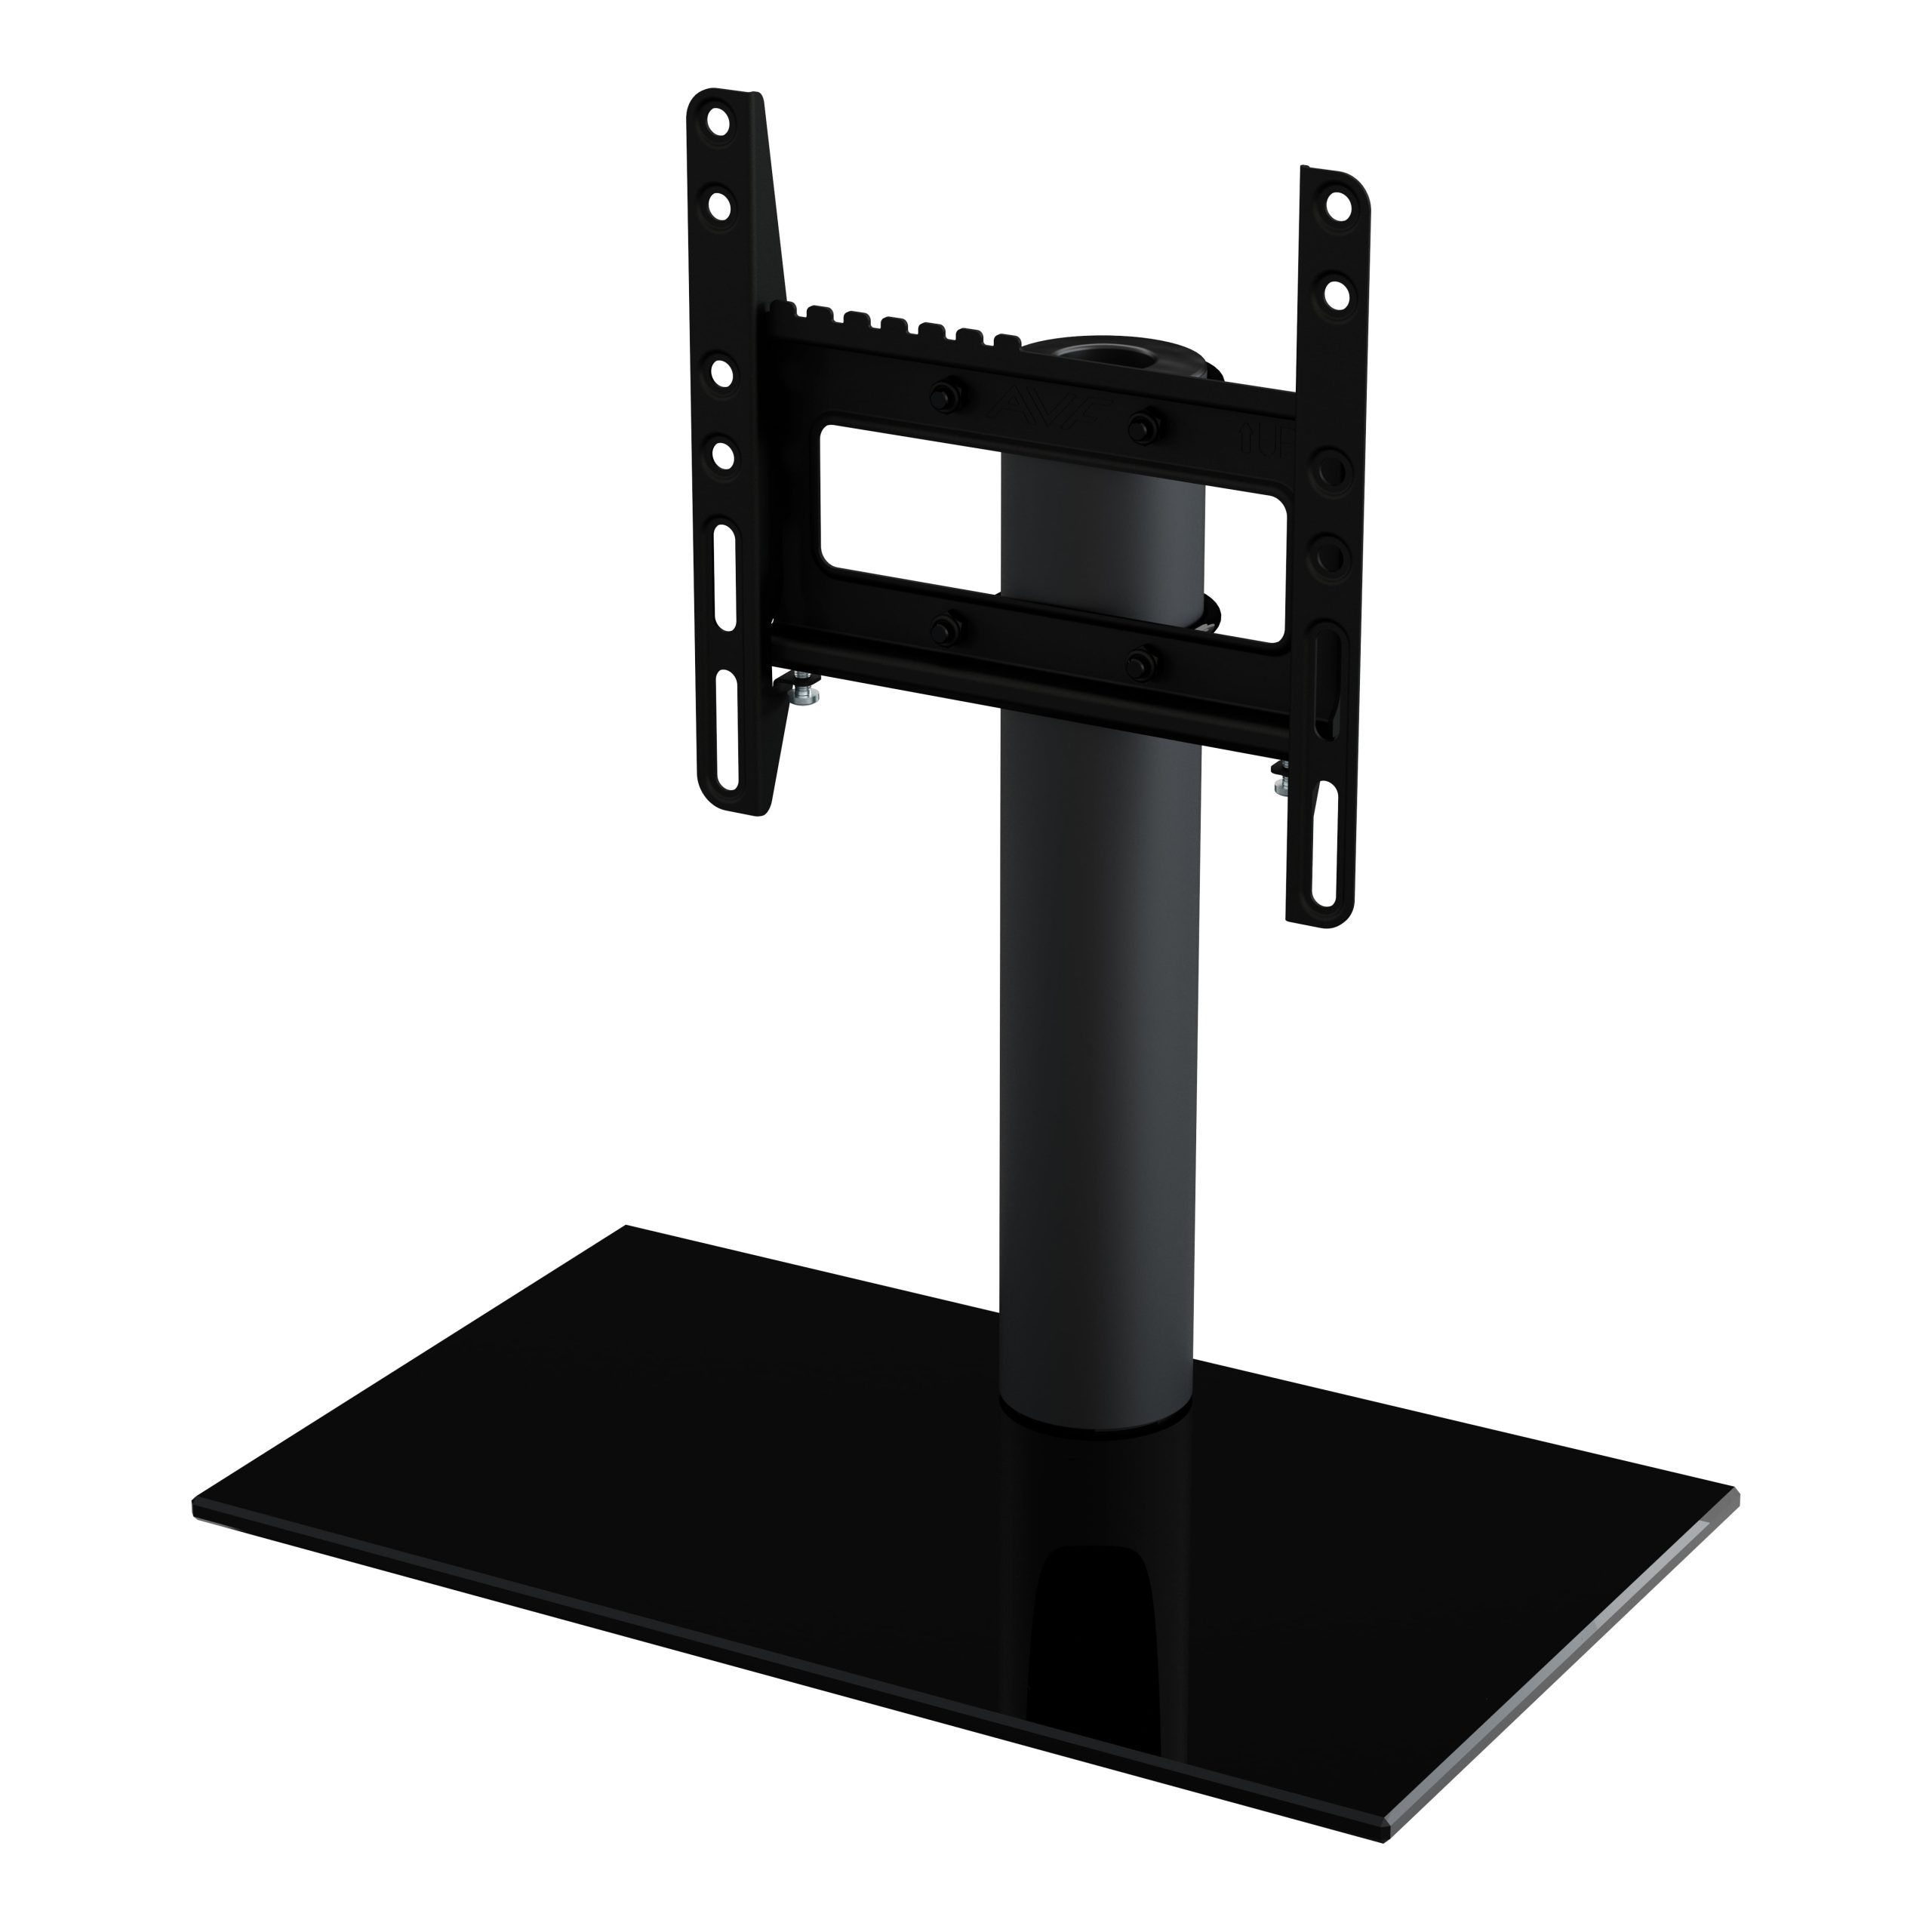 Avf B200bb A Universal Table Top Tv Stand / Tv Base – Fixed Position Intended For Top Shelf Mount Tv Stands (Gallery 15 of 20)